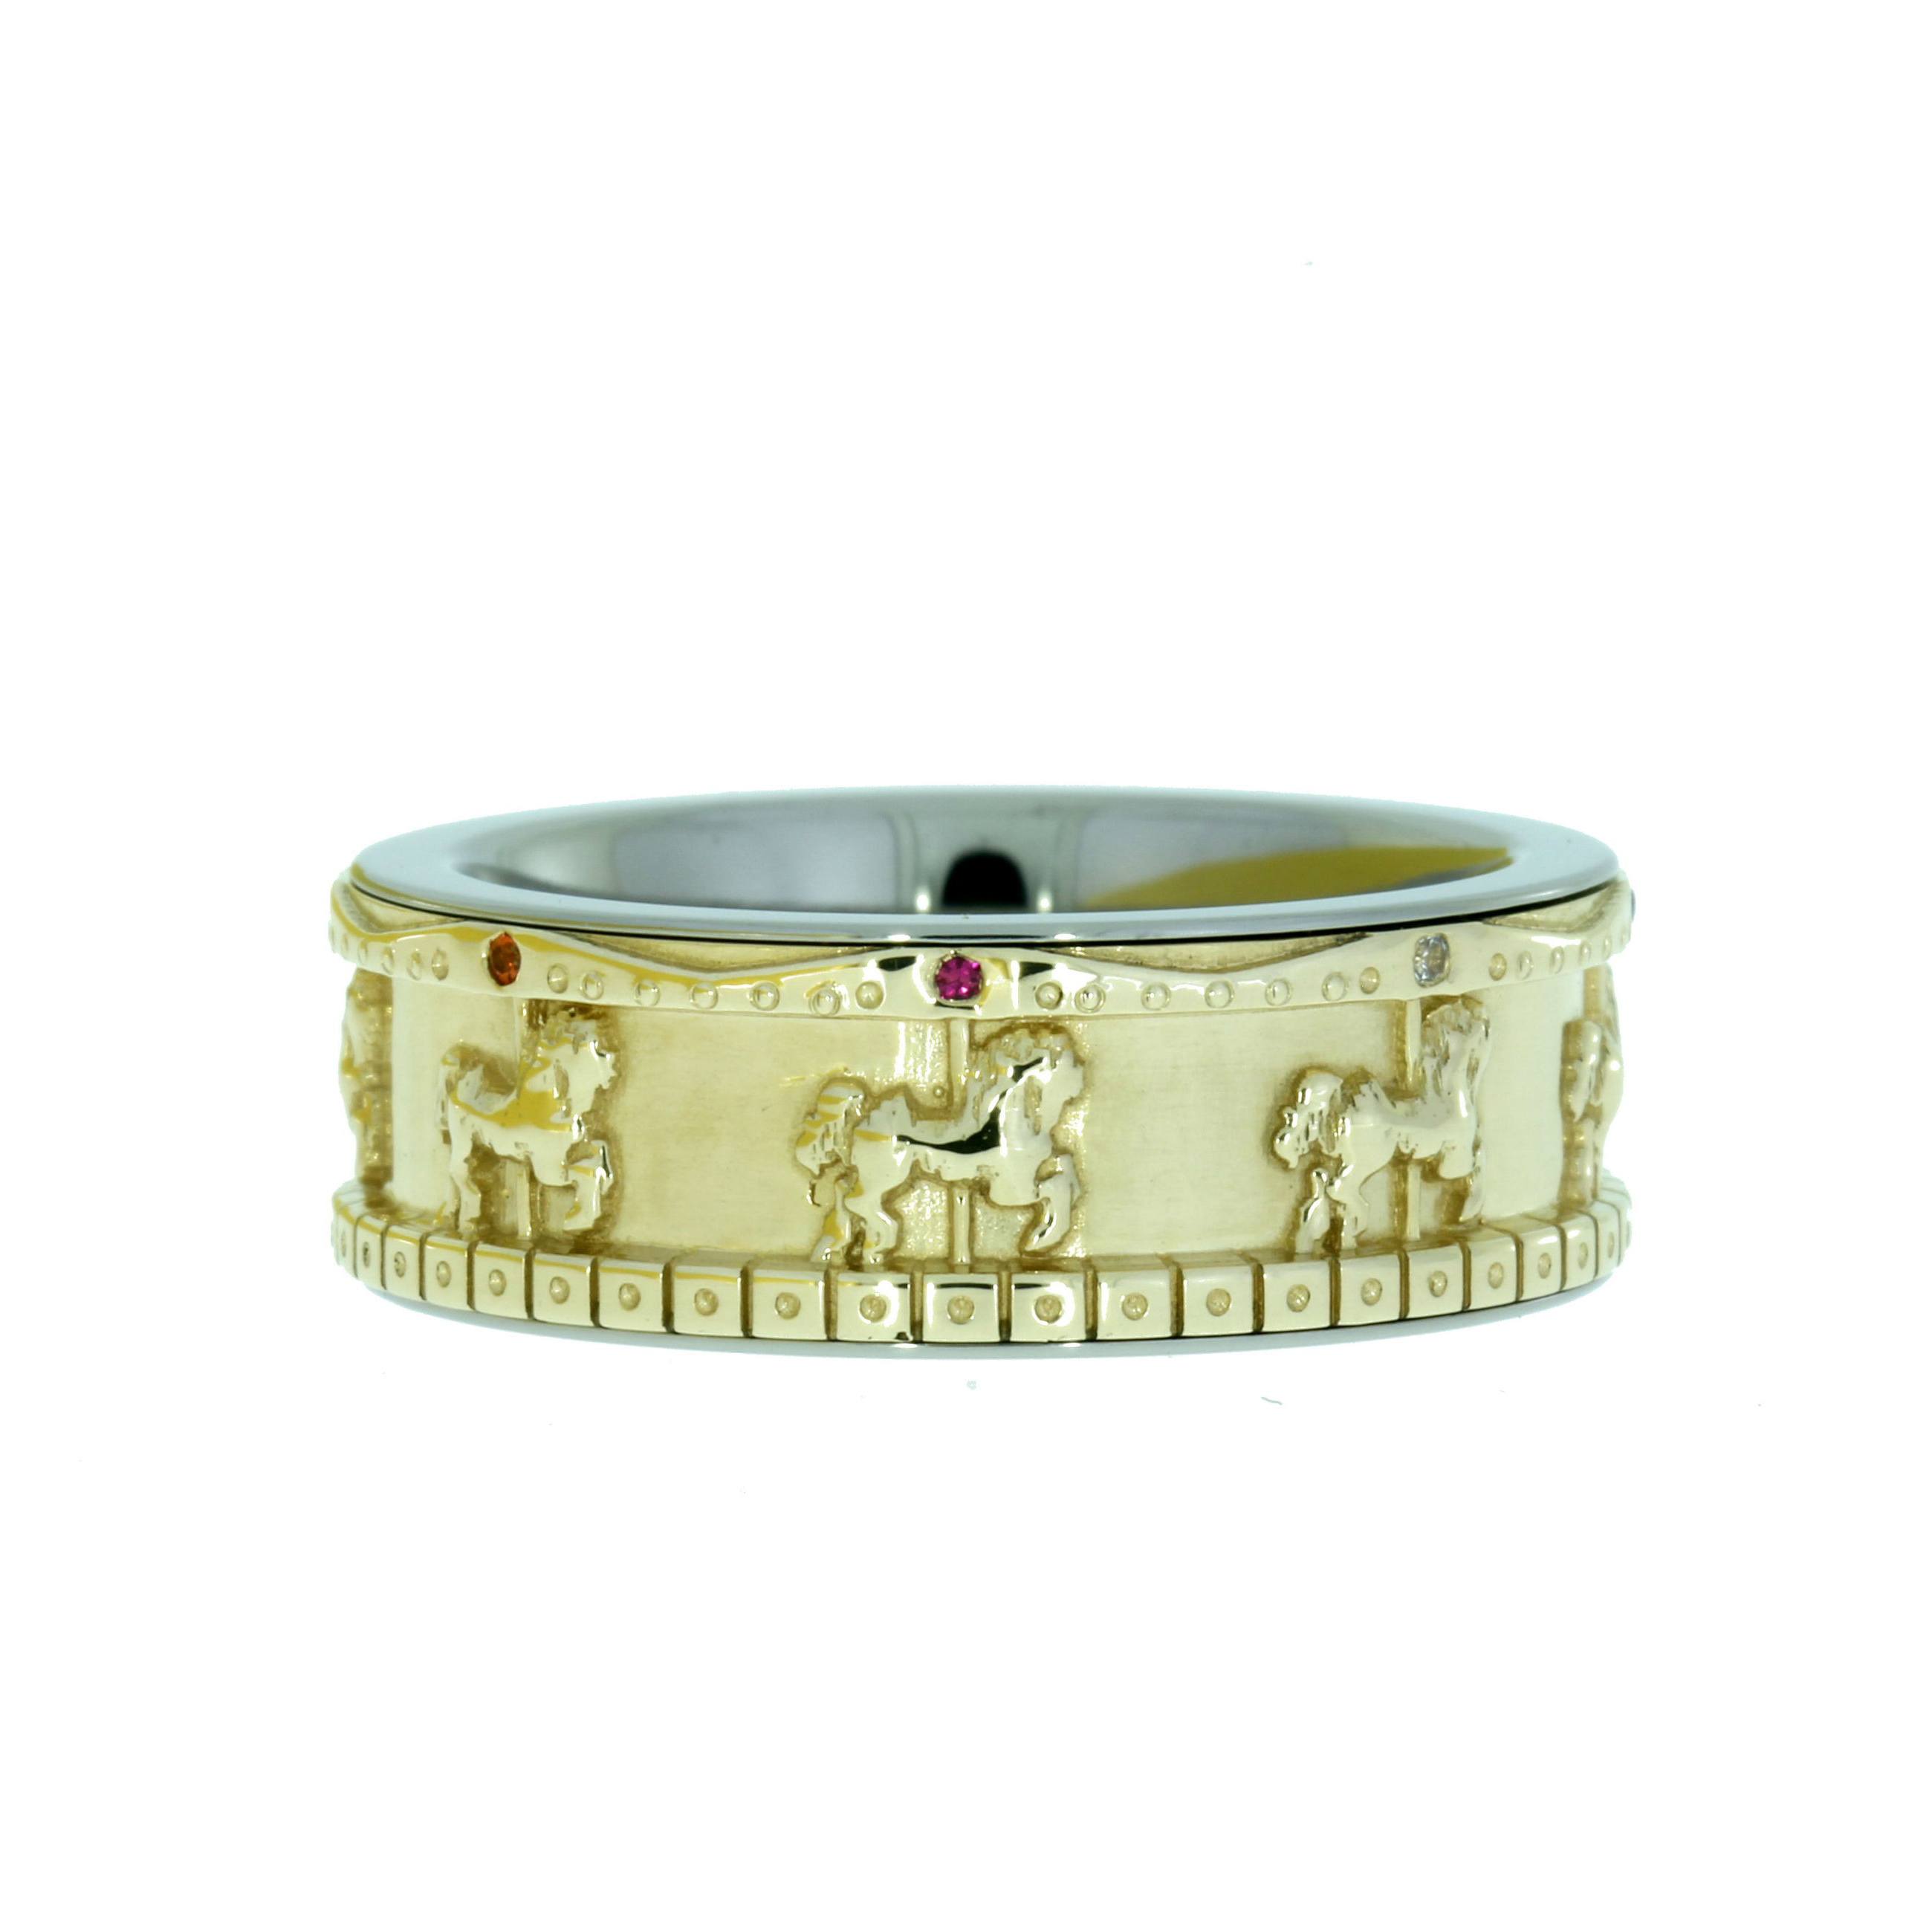 Old-Fashioned Carousel Ring, Yellow Gold Merry-Go-Round Ring with Colorful Stones-1511 - Jewelry by Johan